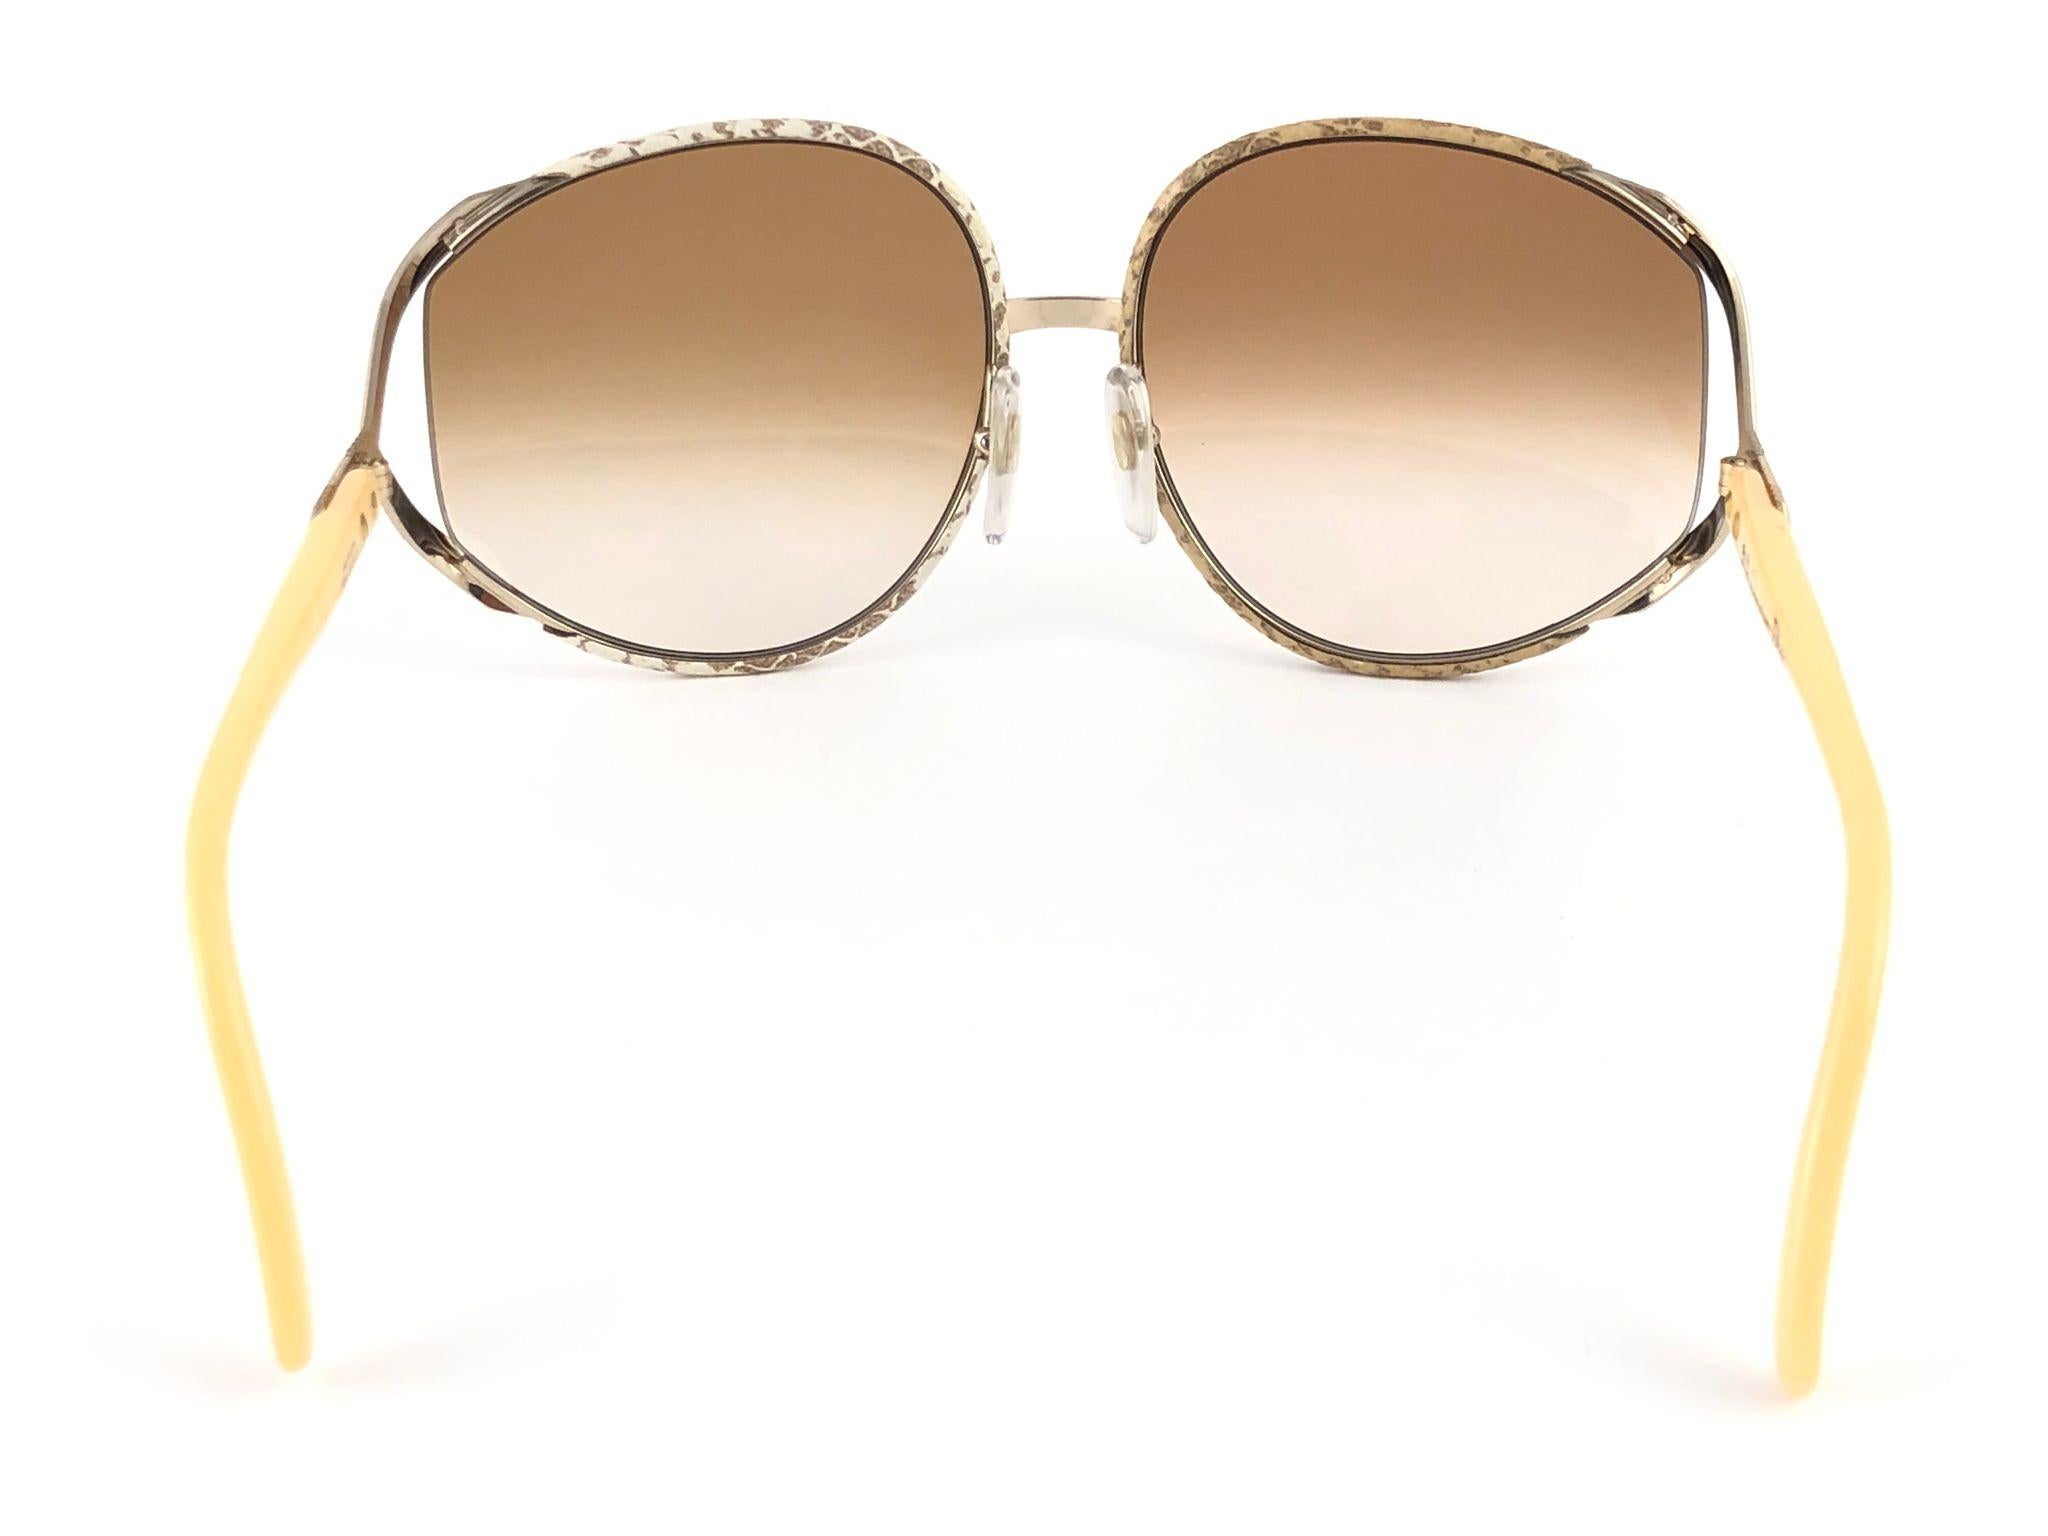 New Vintage Christian Dior 2250 Oversized Python Lined Sunglasses For ...